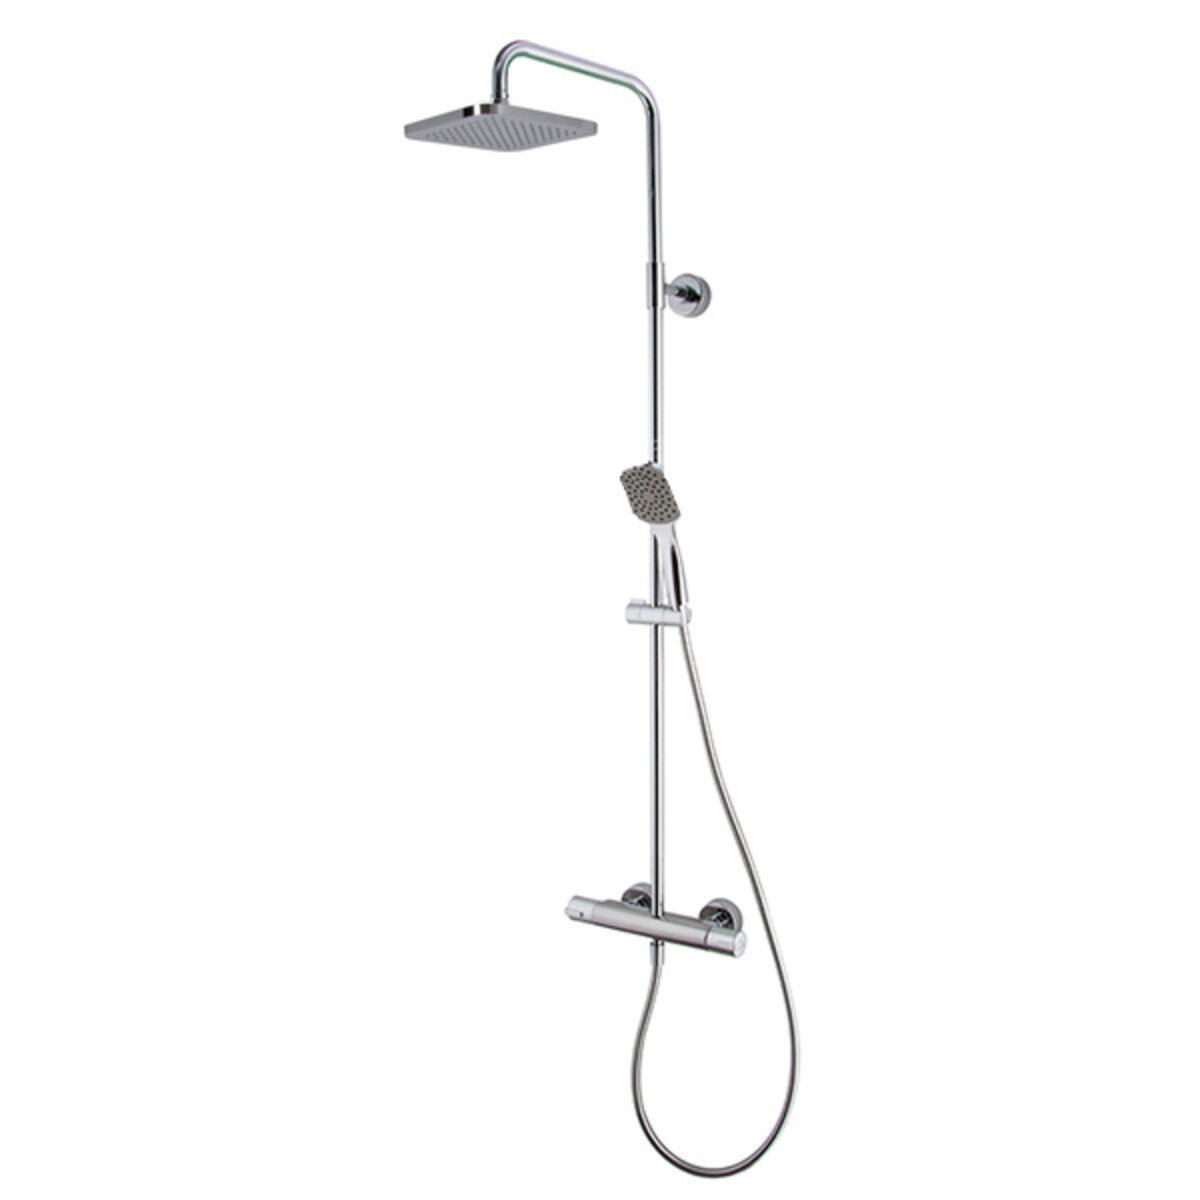 Fima Carlo Frattini Series 22 external shower column two-way diverter thermostatic mixer square shower head and hand shower